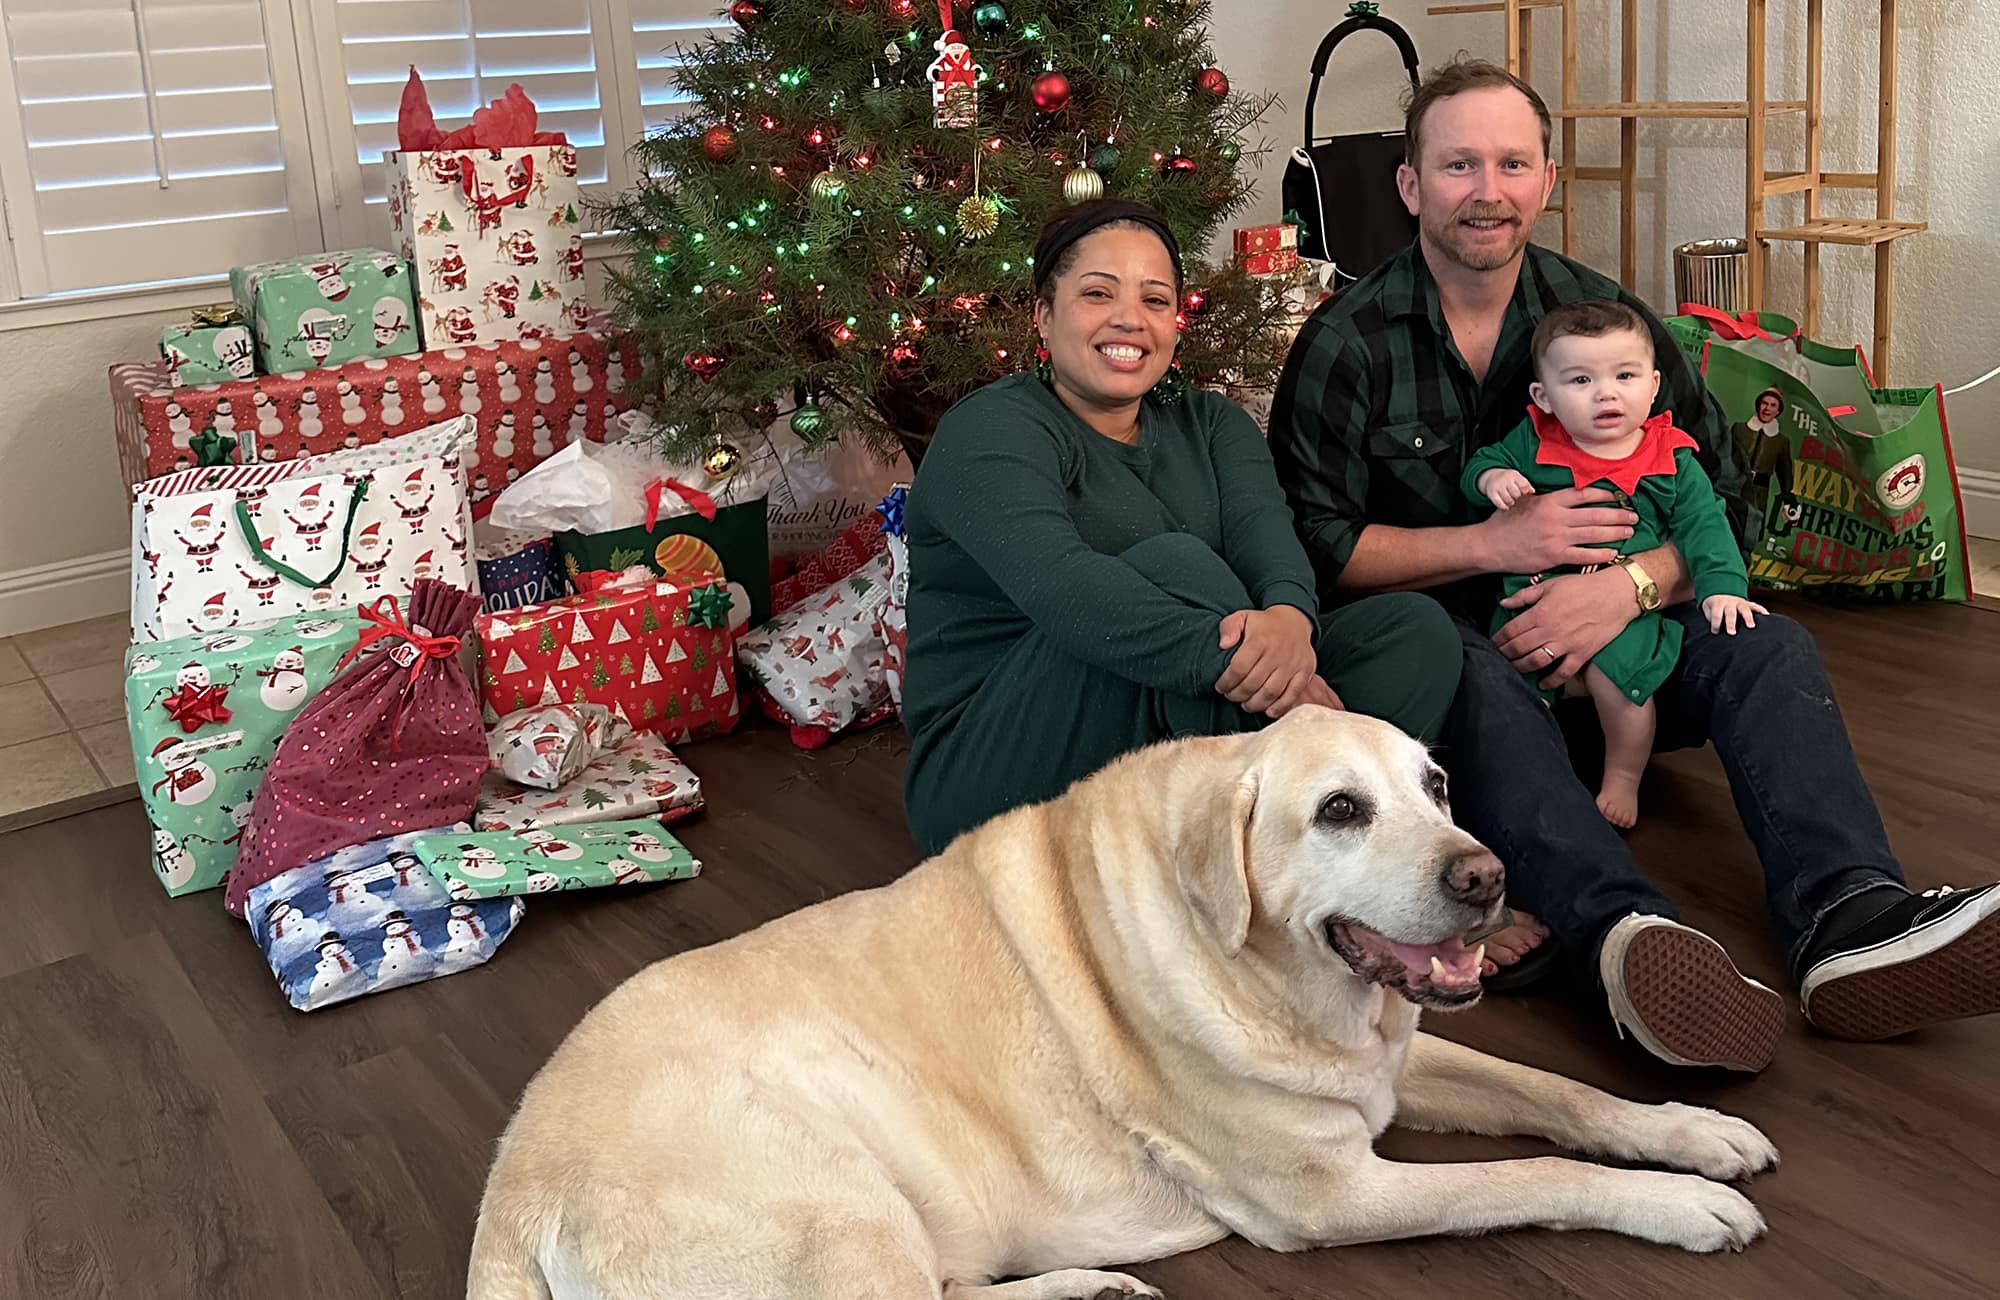 David holds a child in his lap and poses with his wife and a yellow lab in front of a decorated tree surrounded by wrapped gifts.